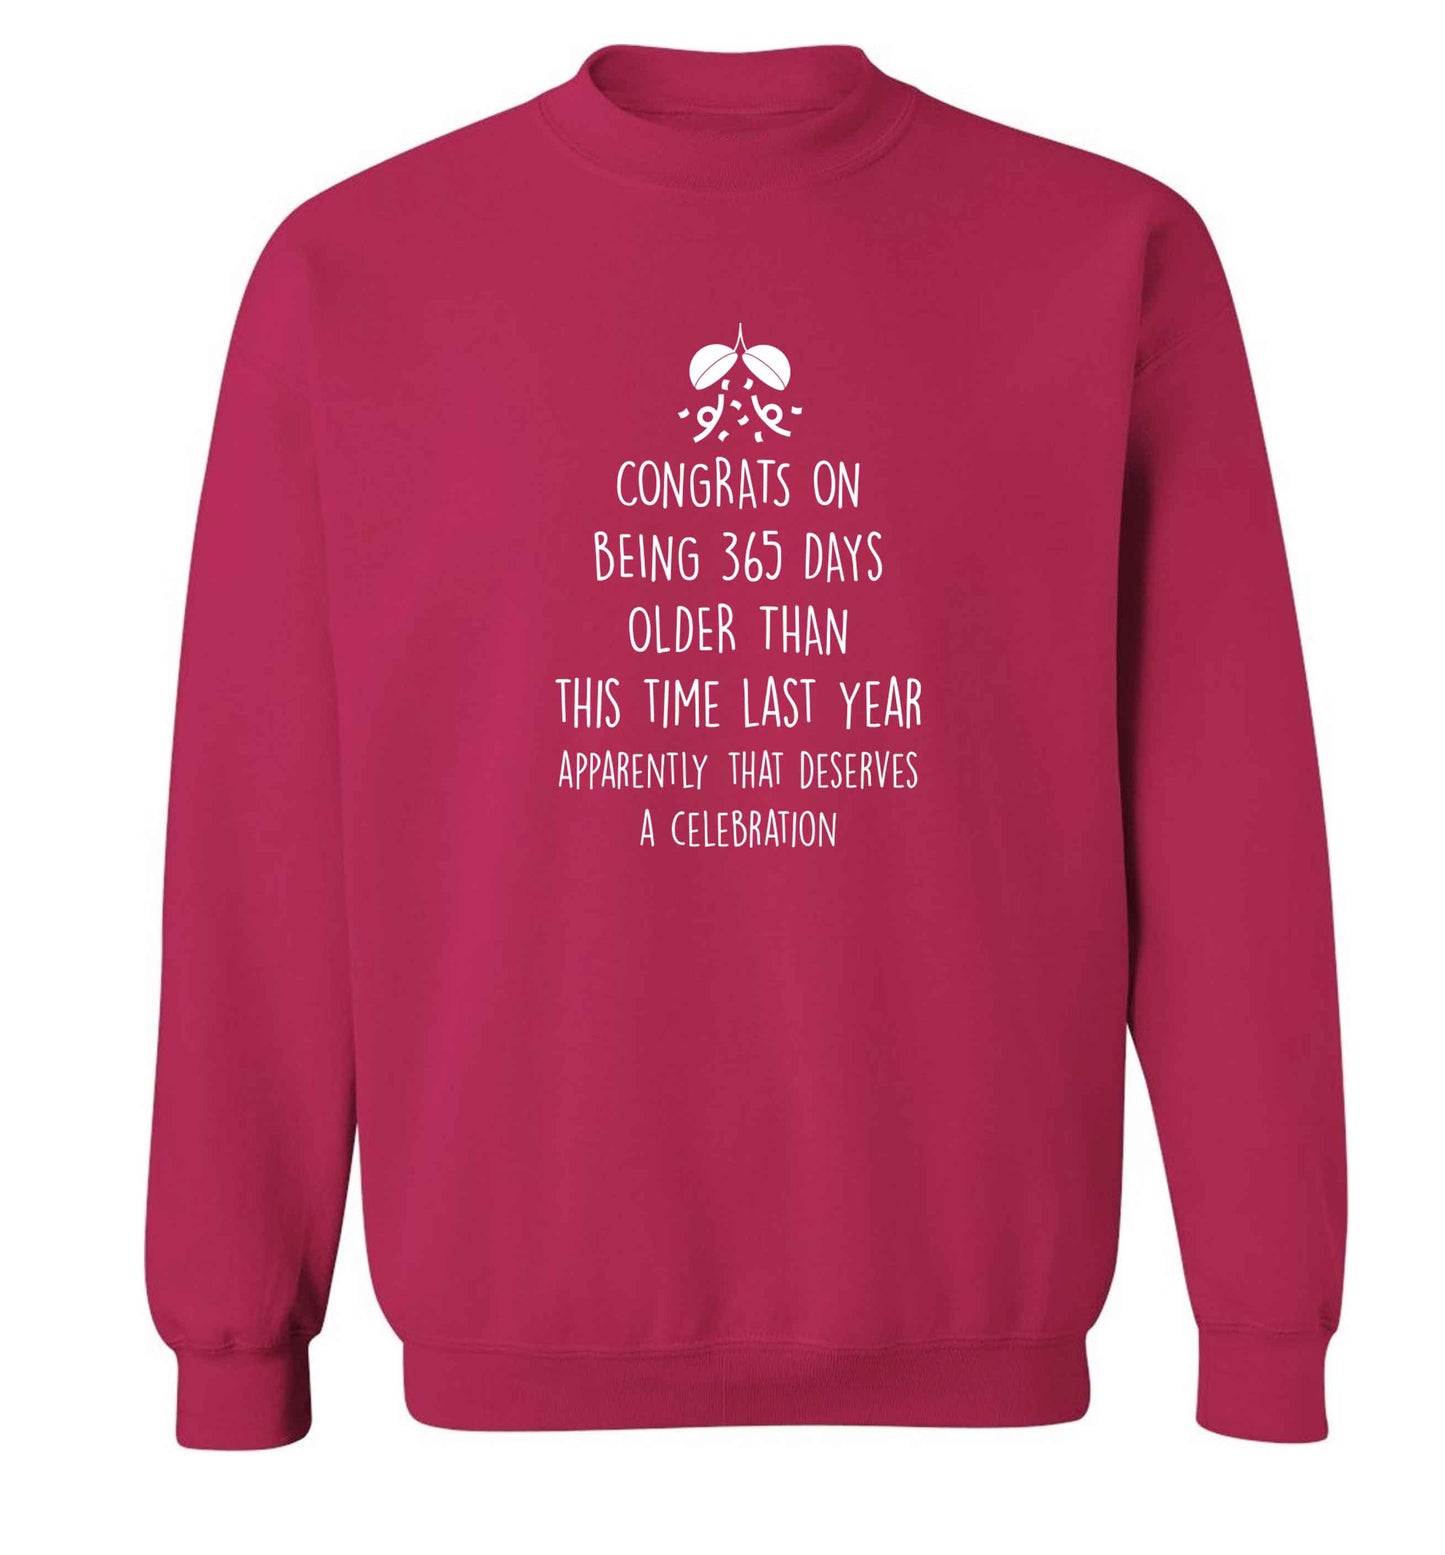 Congrats on being 365 days older than you were this time last year apparently that deserves a celebration adult's unisex pink sweater 2XL